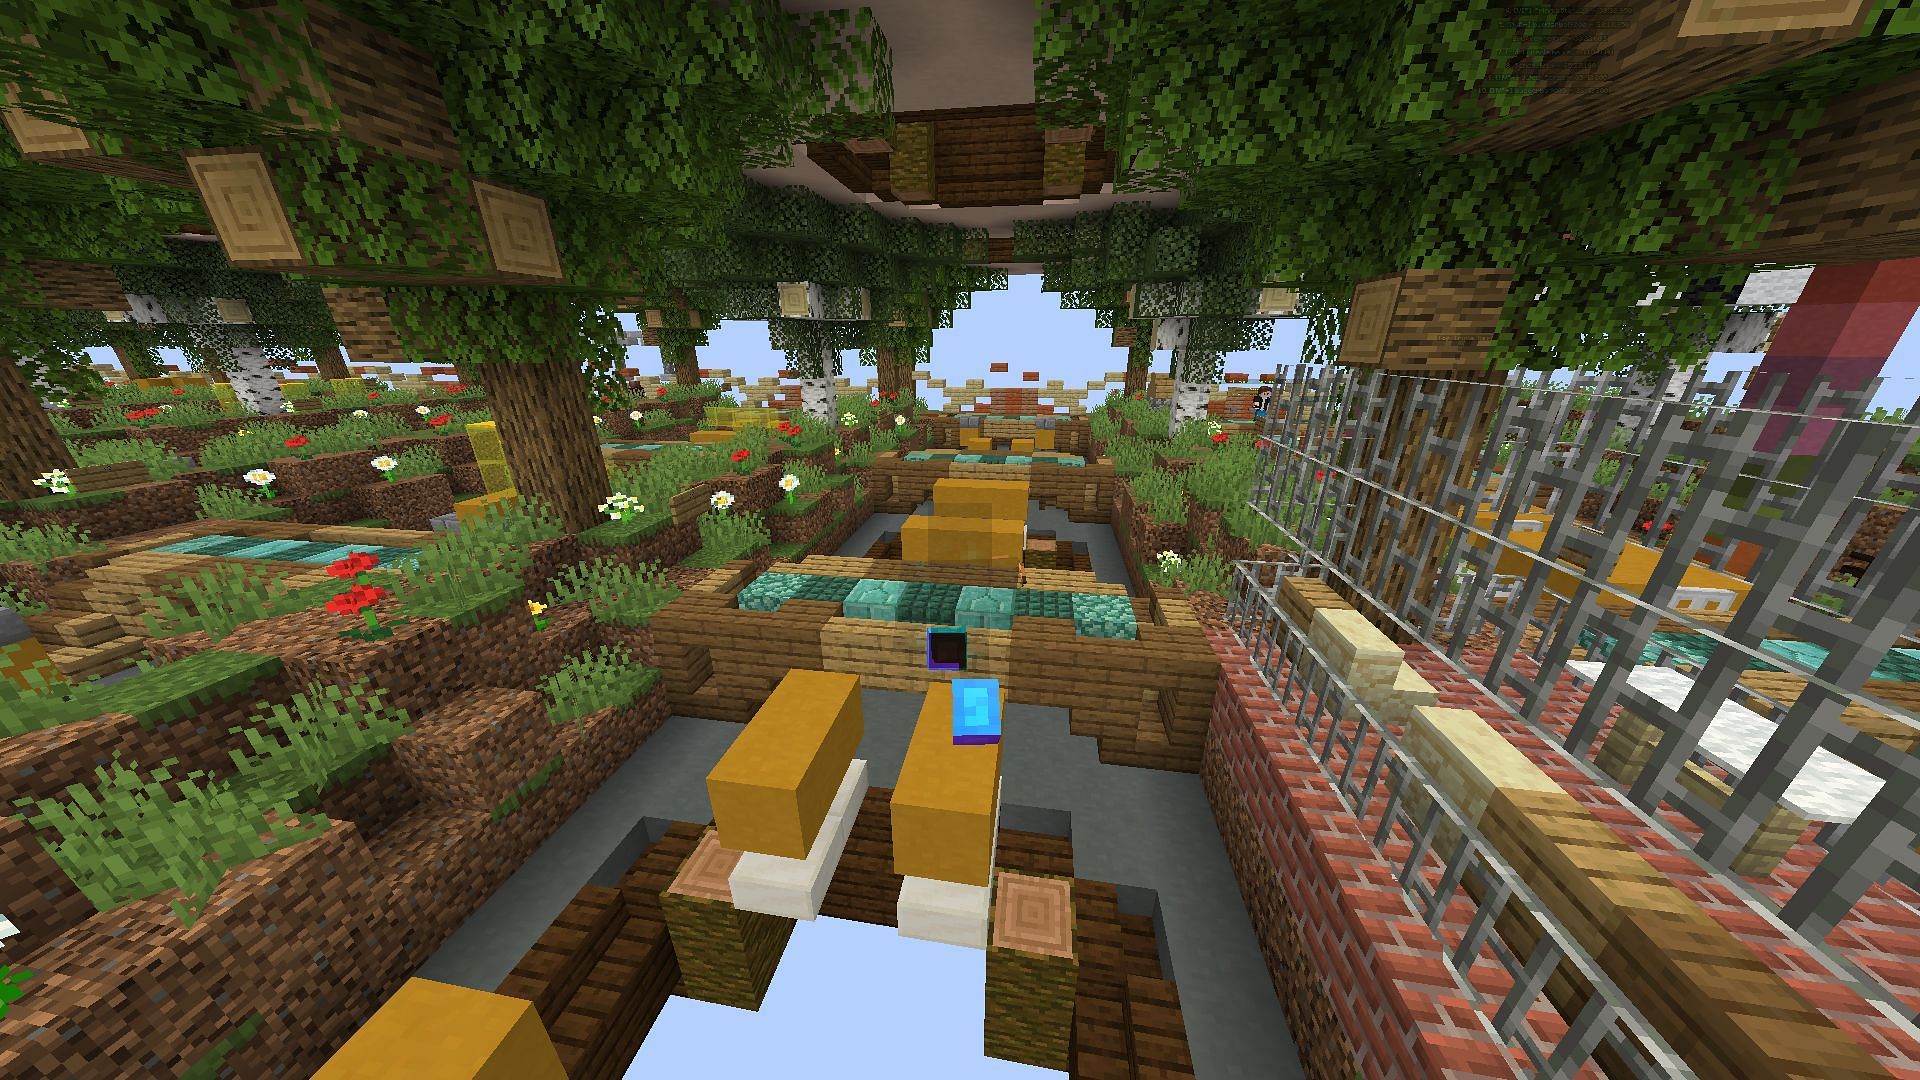 Parkour practice Minecraft servers are a brilliant place to further hone your skills (Image via Mojang)